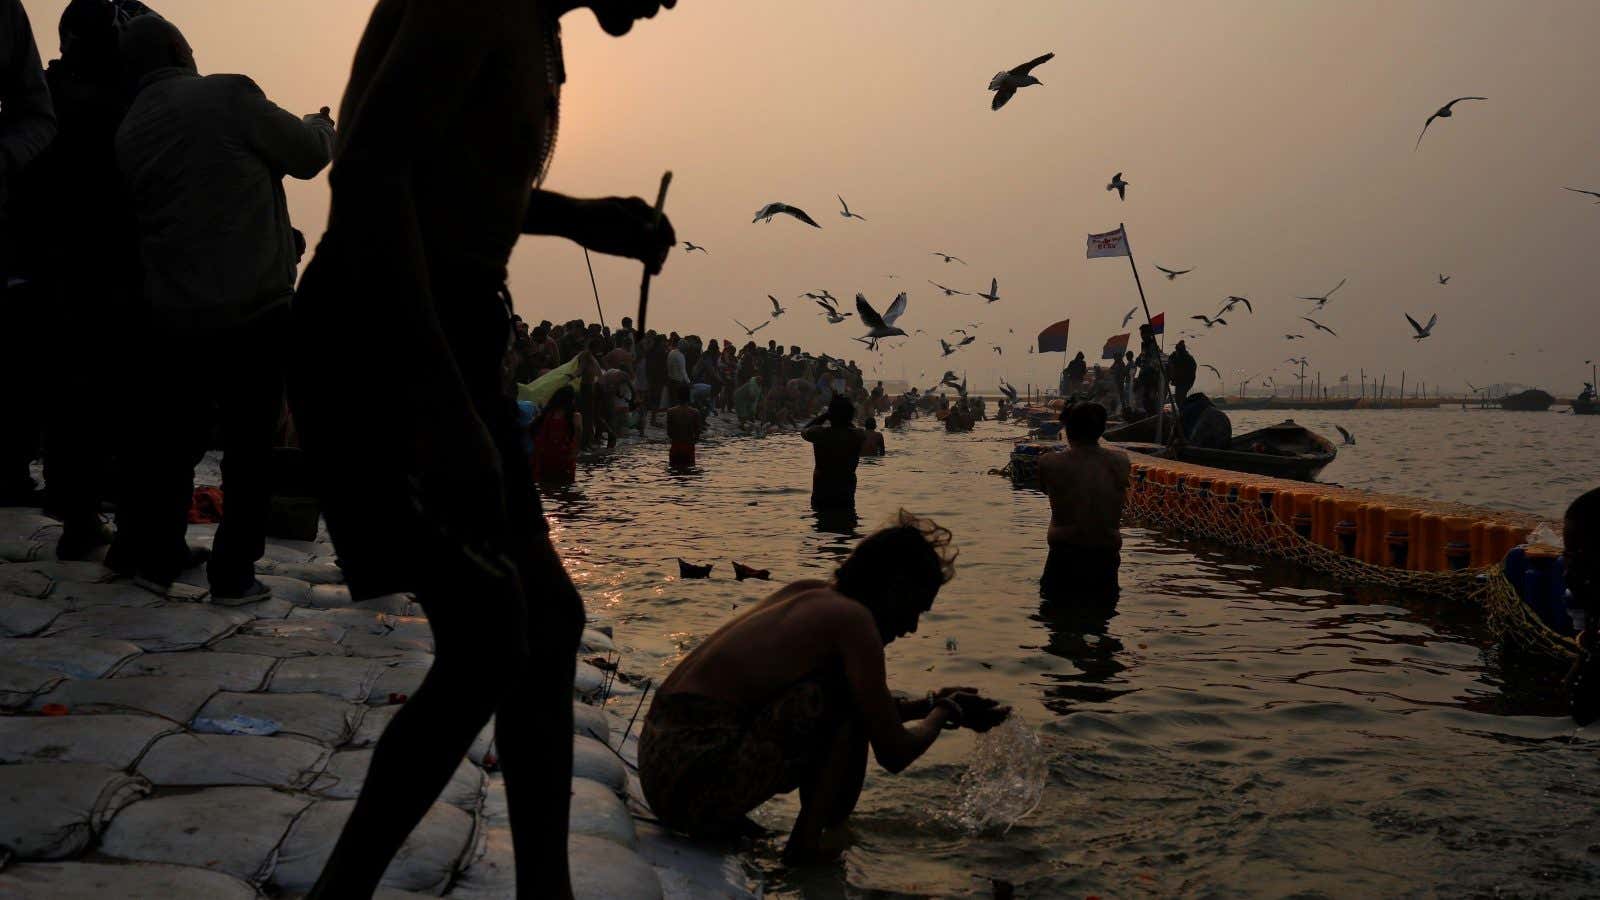 Devotees take a holy dip at Sangam, the confluence of the Ganges, Yamuna and Saraswati rivers, during “Kumbh Mela”, or the Pitcher Festival, in Prayagraj,…